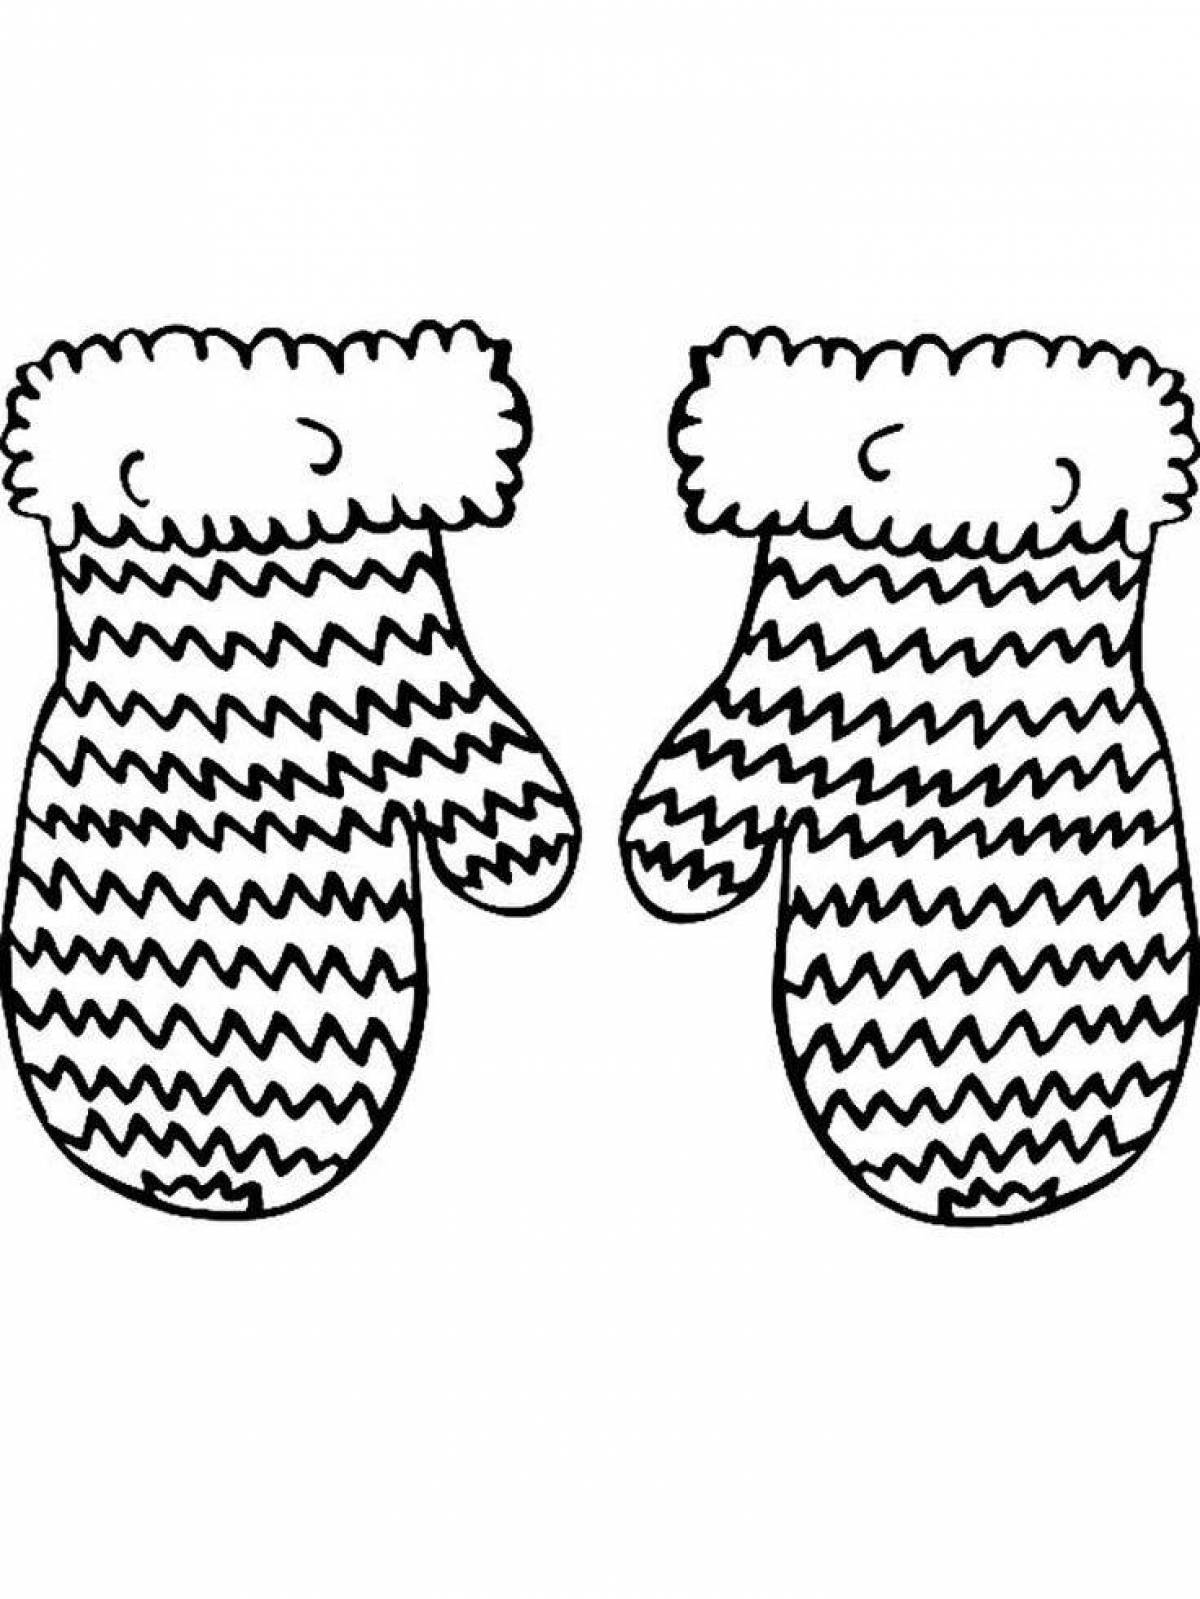 Coloring mittens for kids